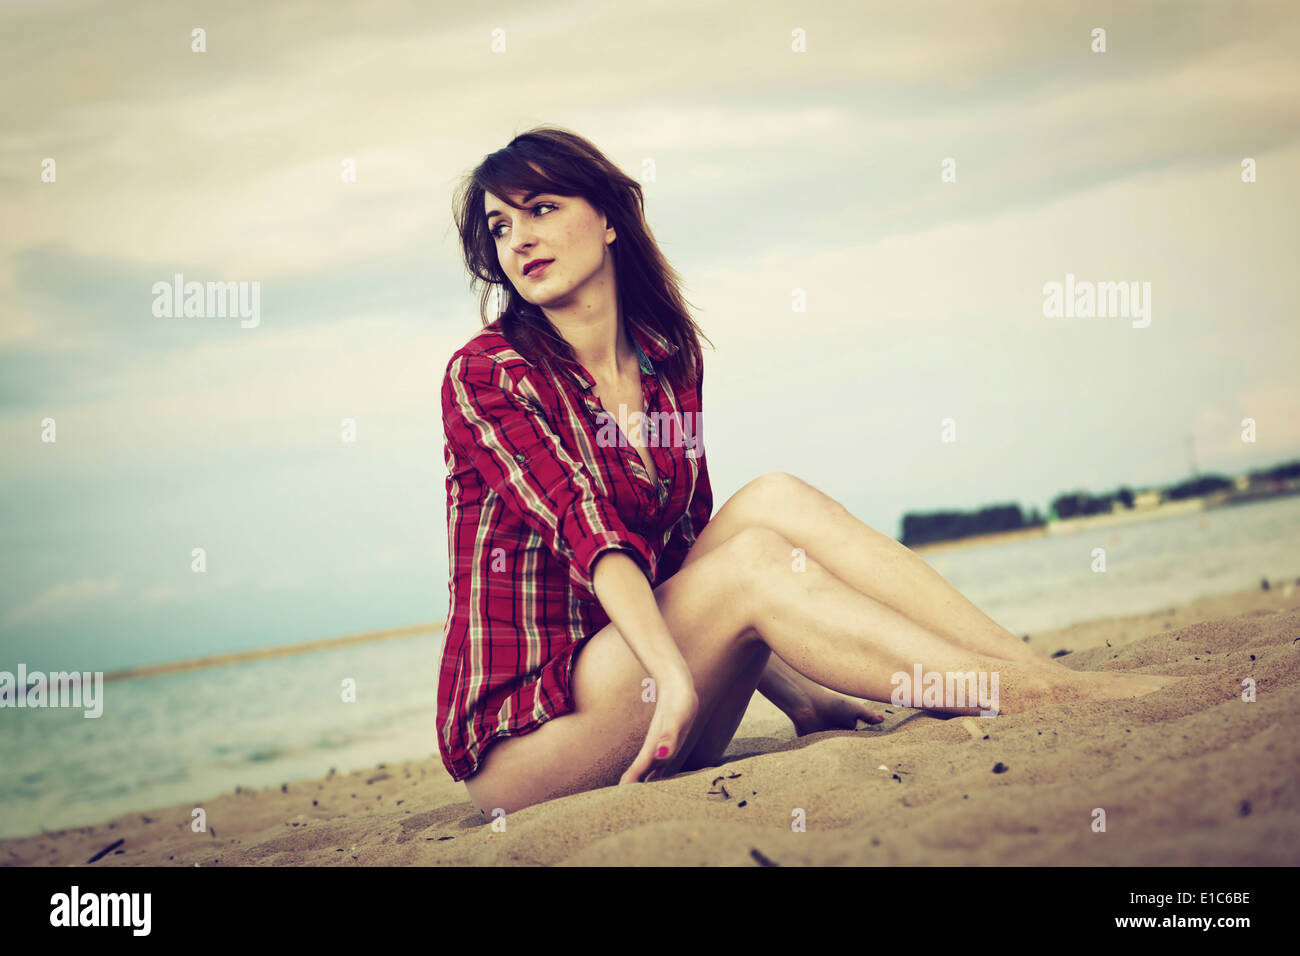 Young woman in a red checked shirt relaxing on the beach at sunset Stock Photo